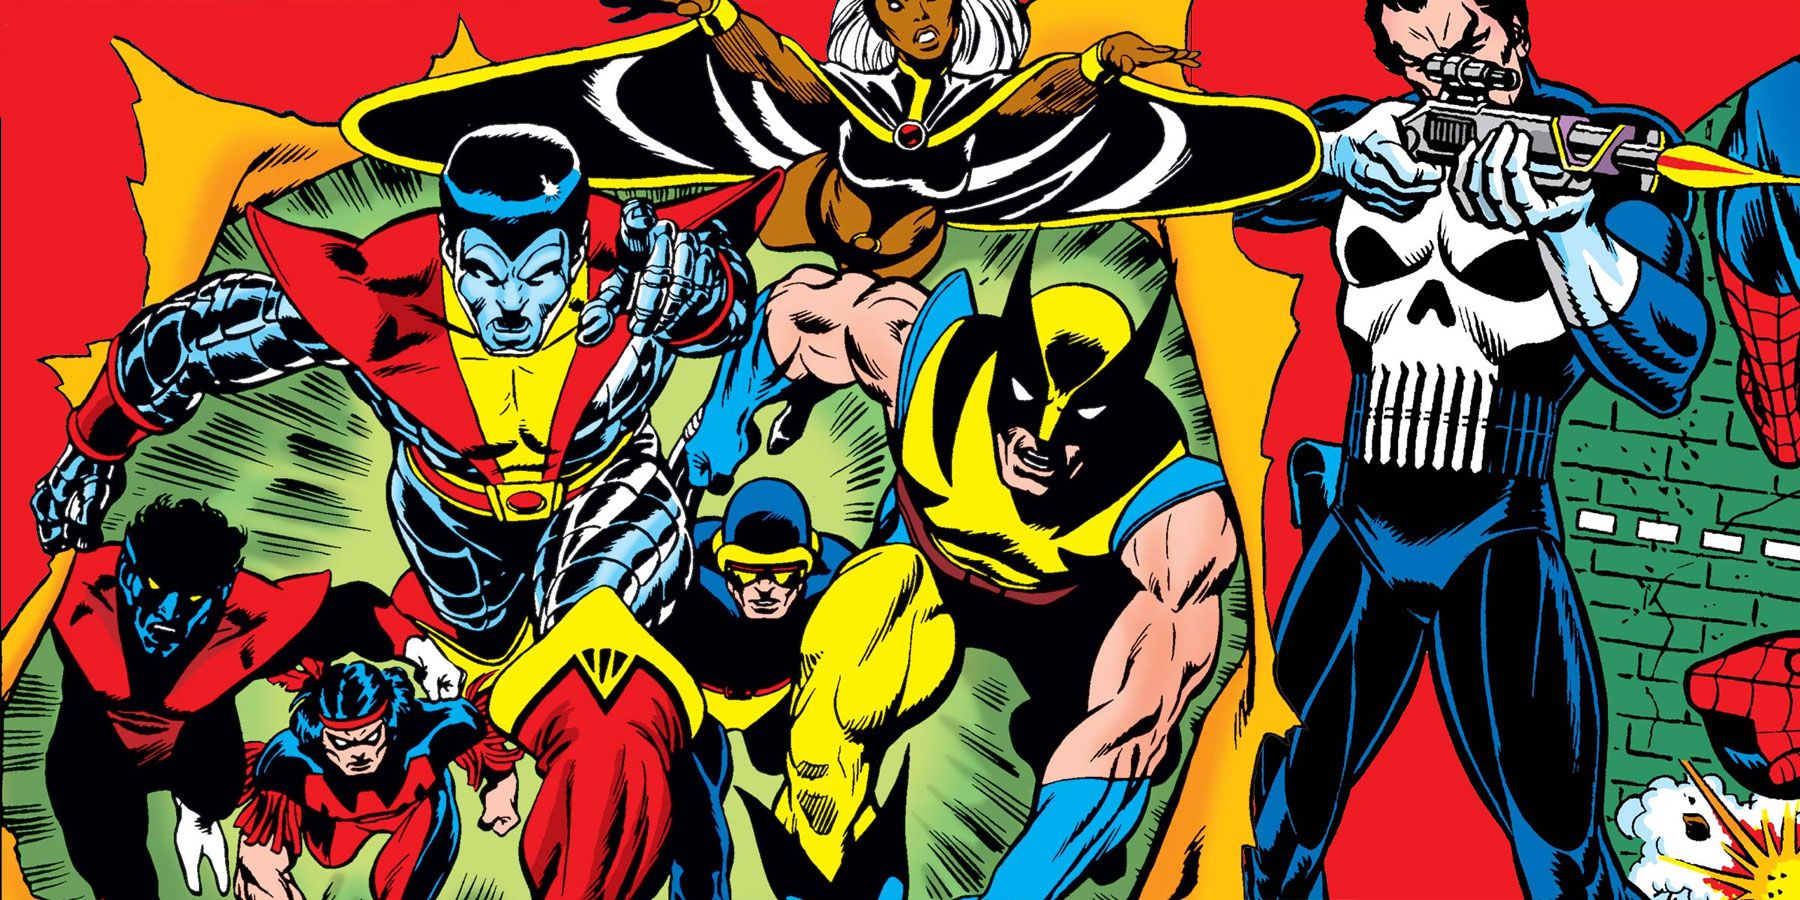 X-Men and Punisher are two first appearances in the 1970s